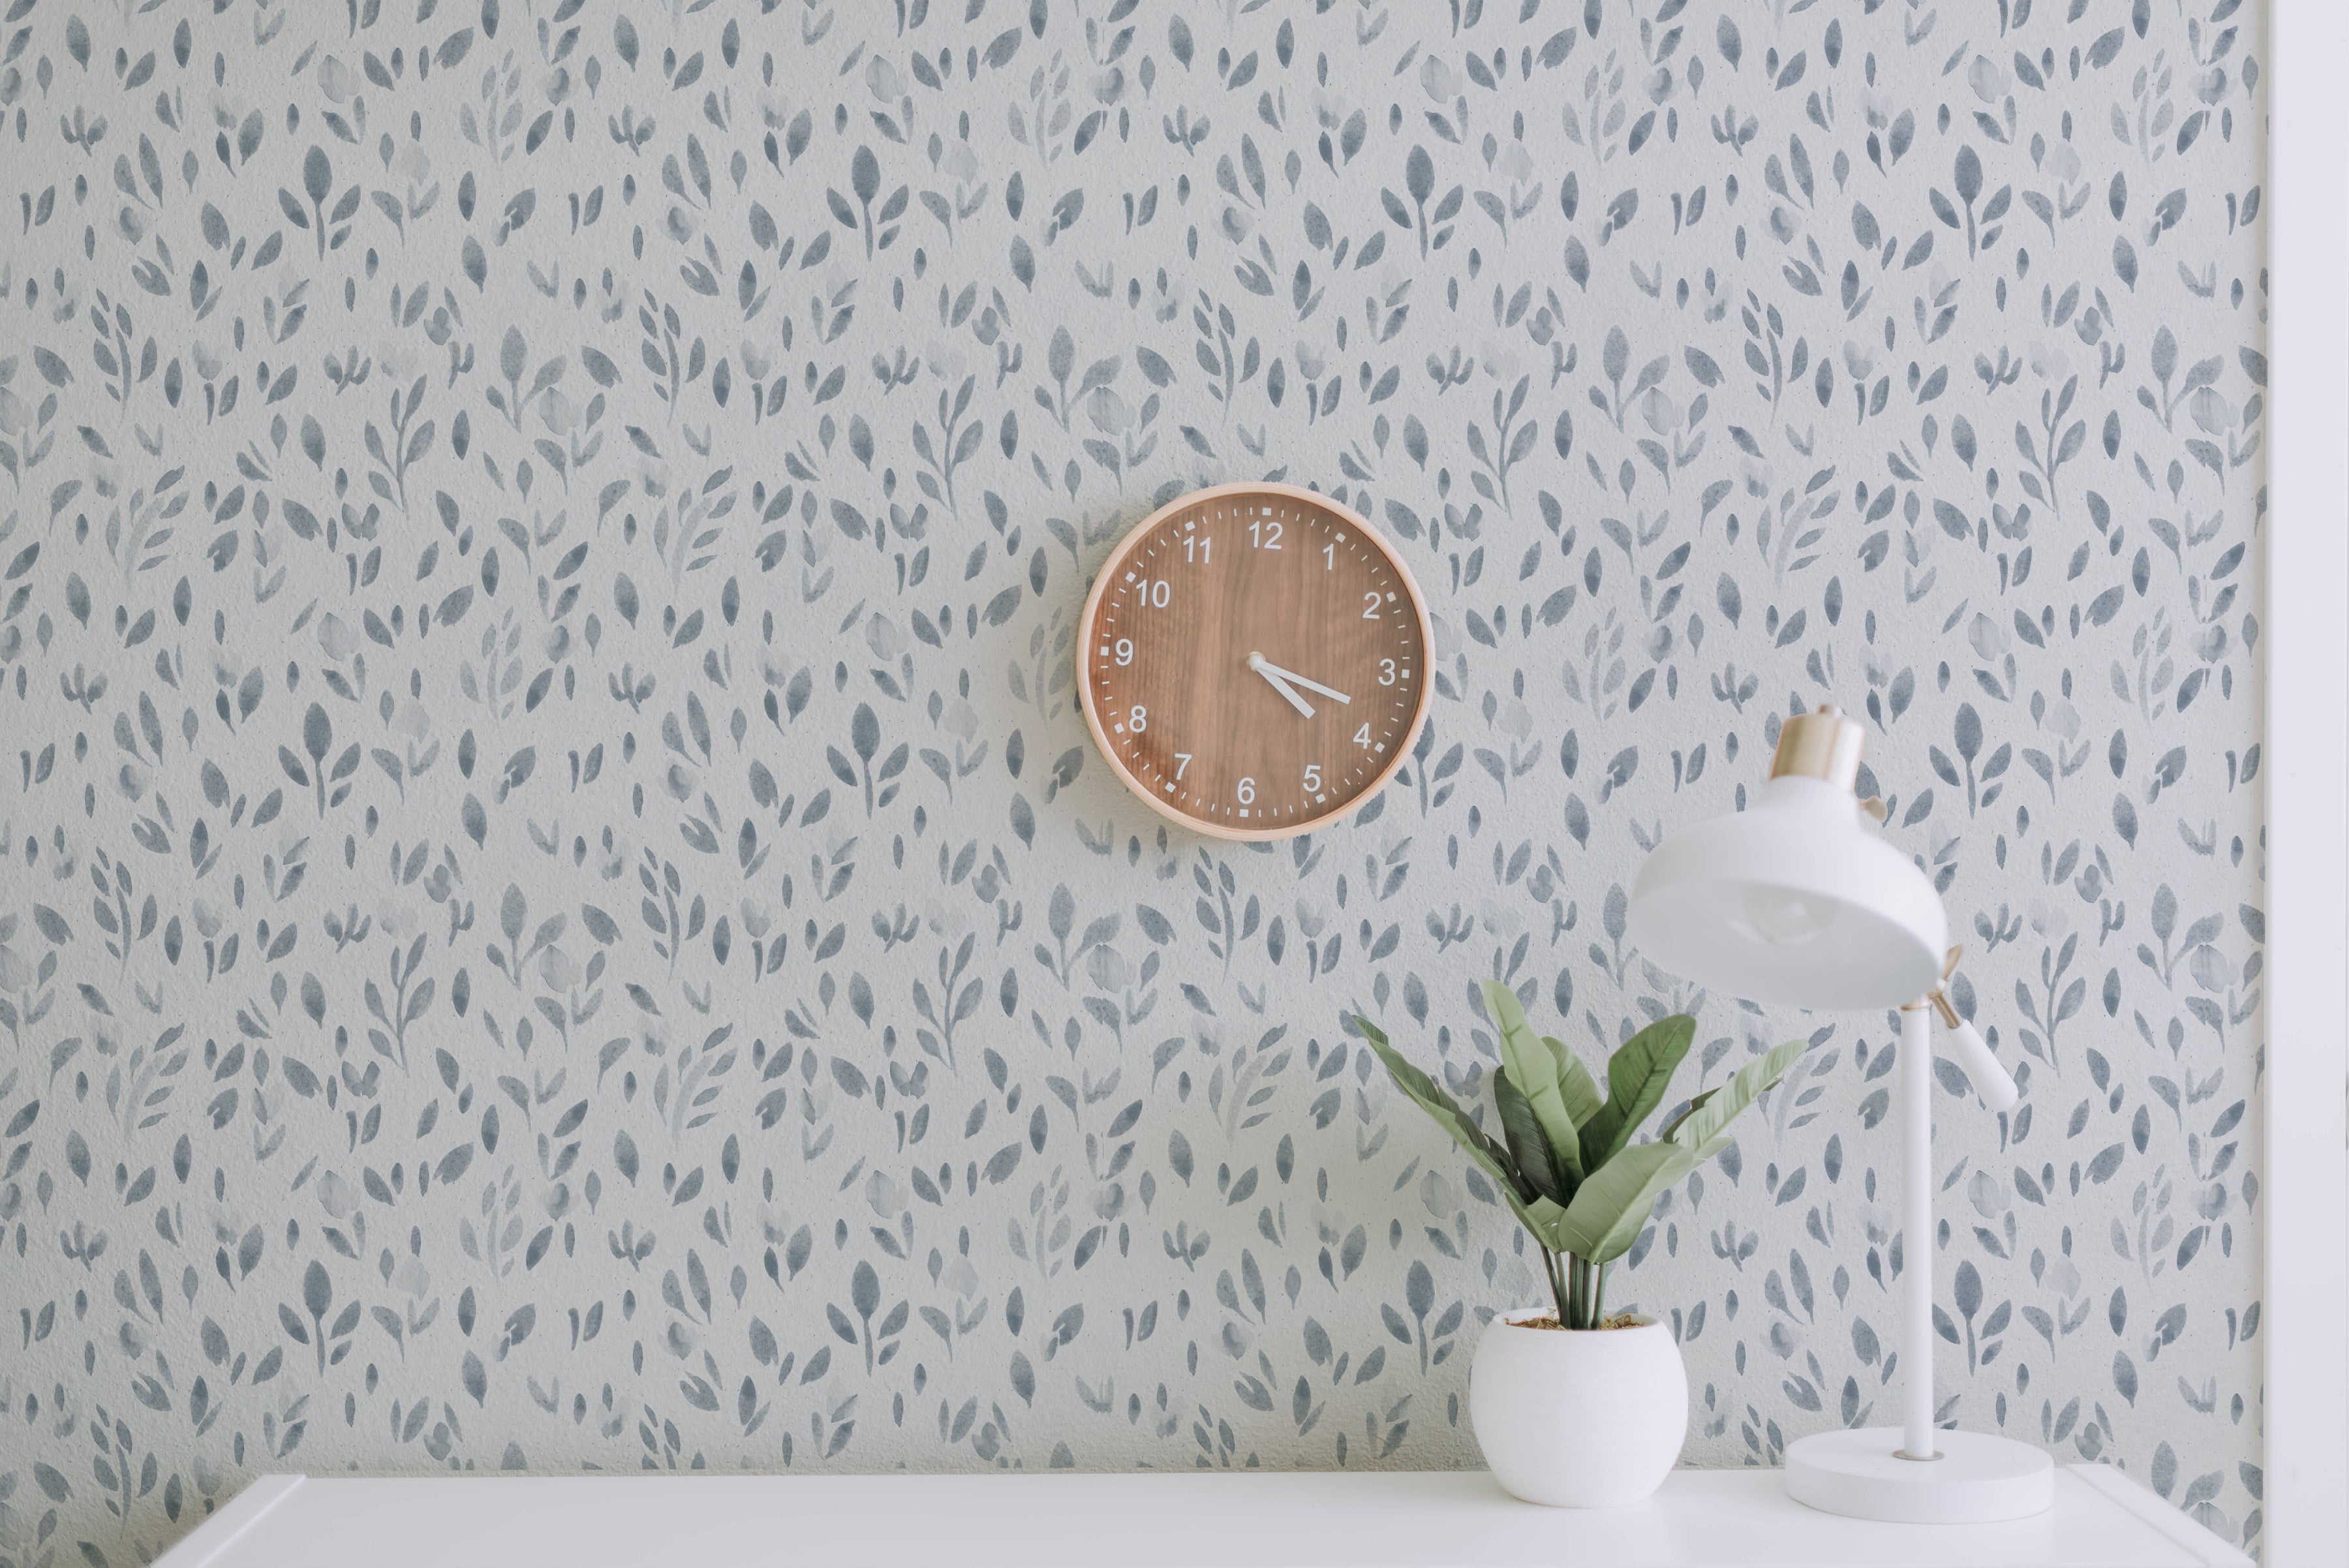 A well-composed interior scene using the "Subtle Botanica - Pale Blue" wallpaper to create a peaceful and refreshing wall accent. The pale blue leaf patterns contribute to a tranquil atmosphere, complemented by a wooden clock, a modern white desk lamp, and a potted plant. The wallpaper's design successfully creates an organic and calming environment ideal for a study room or living space.